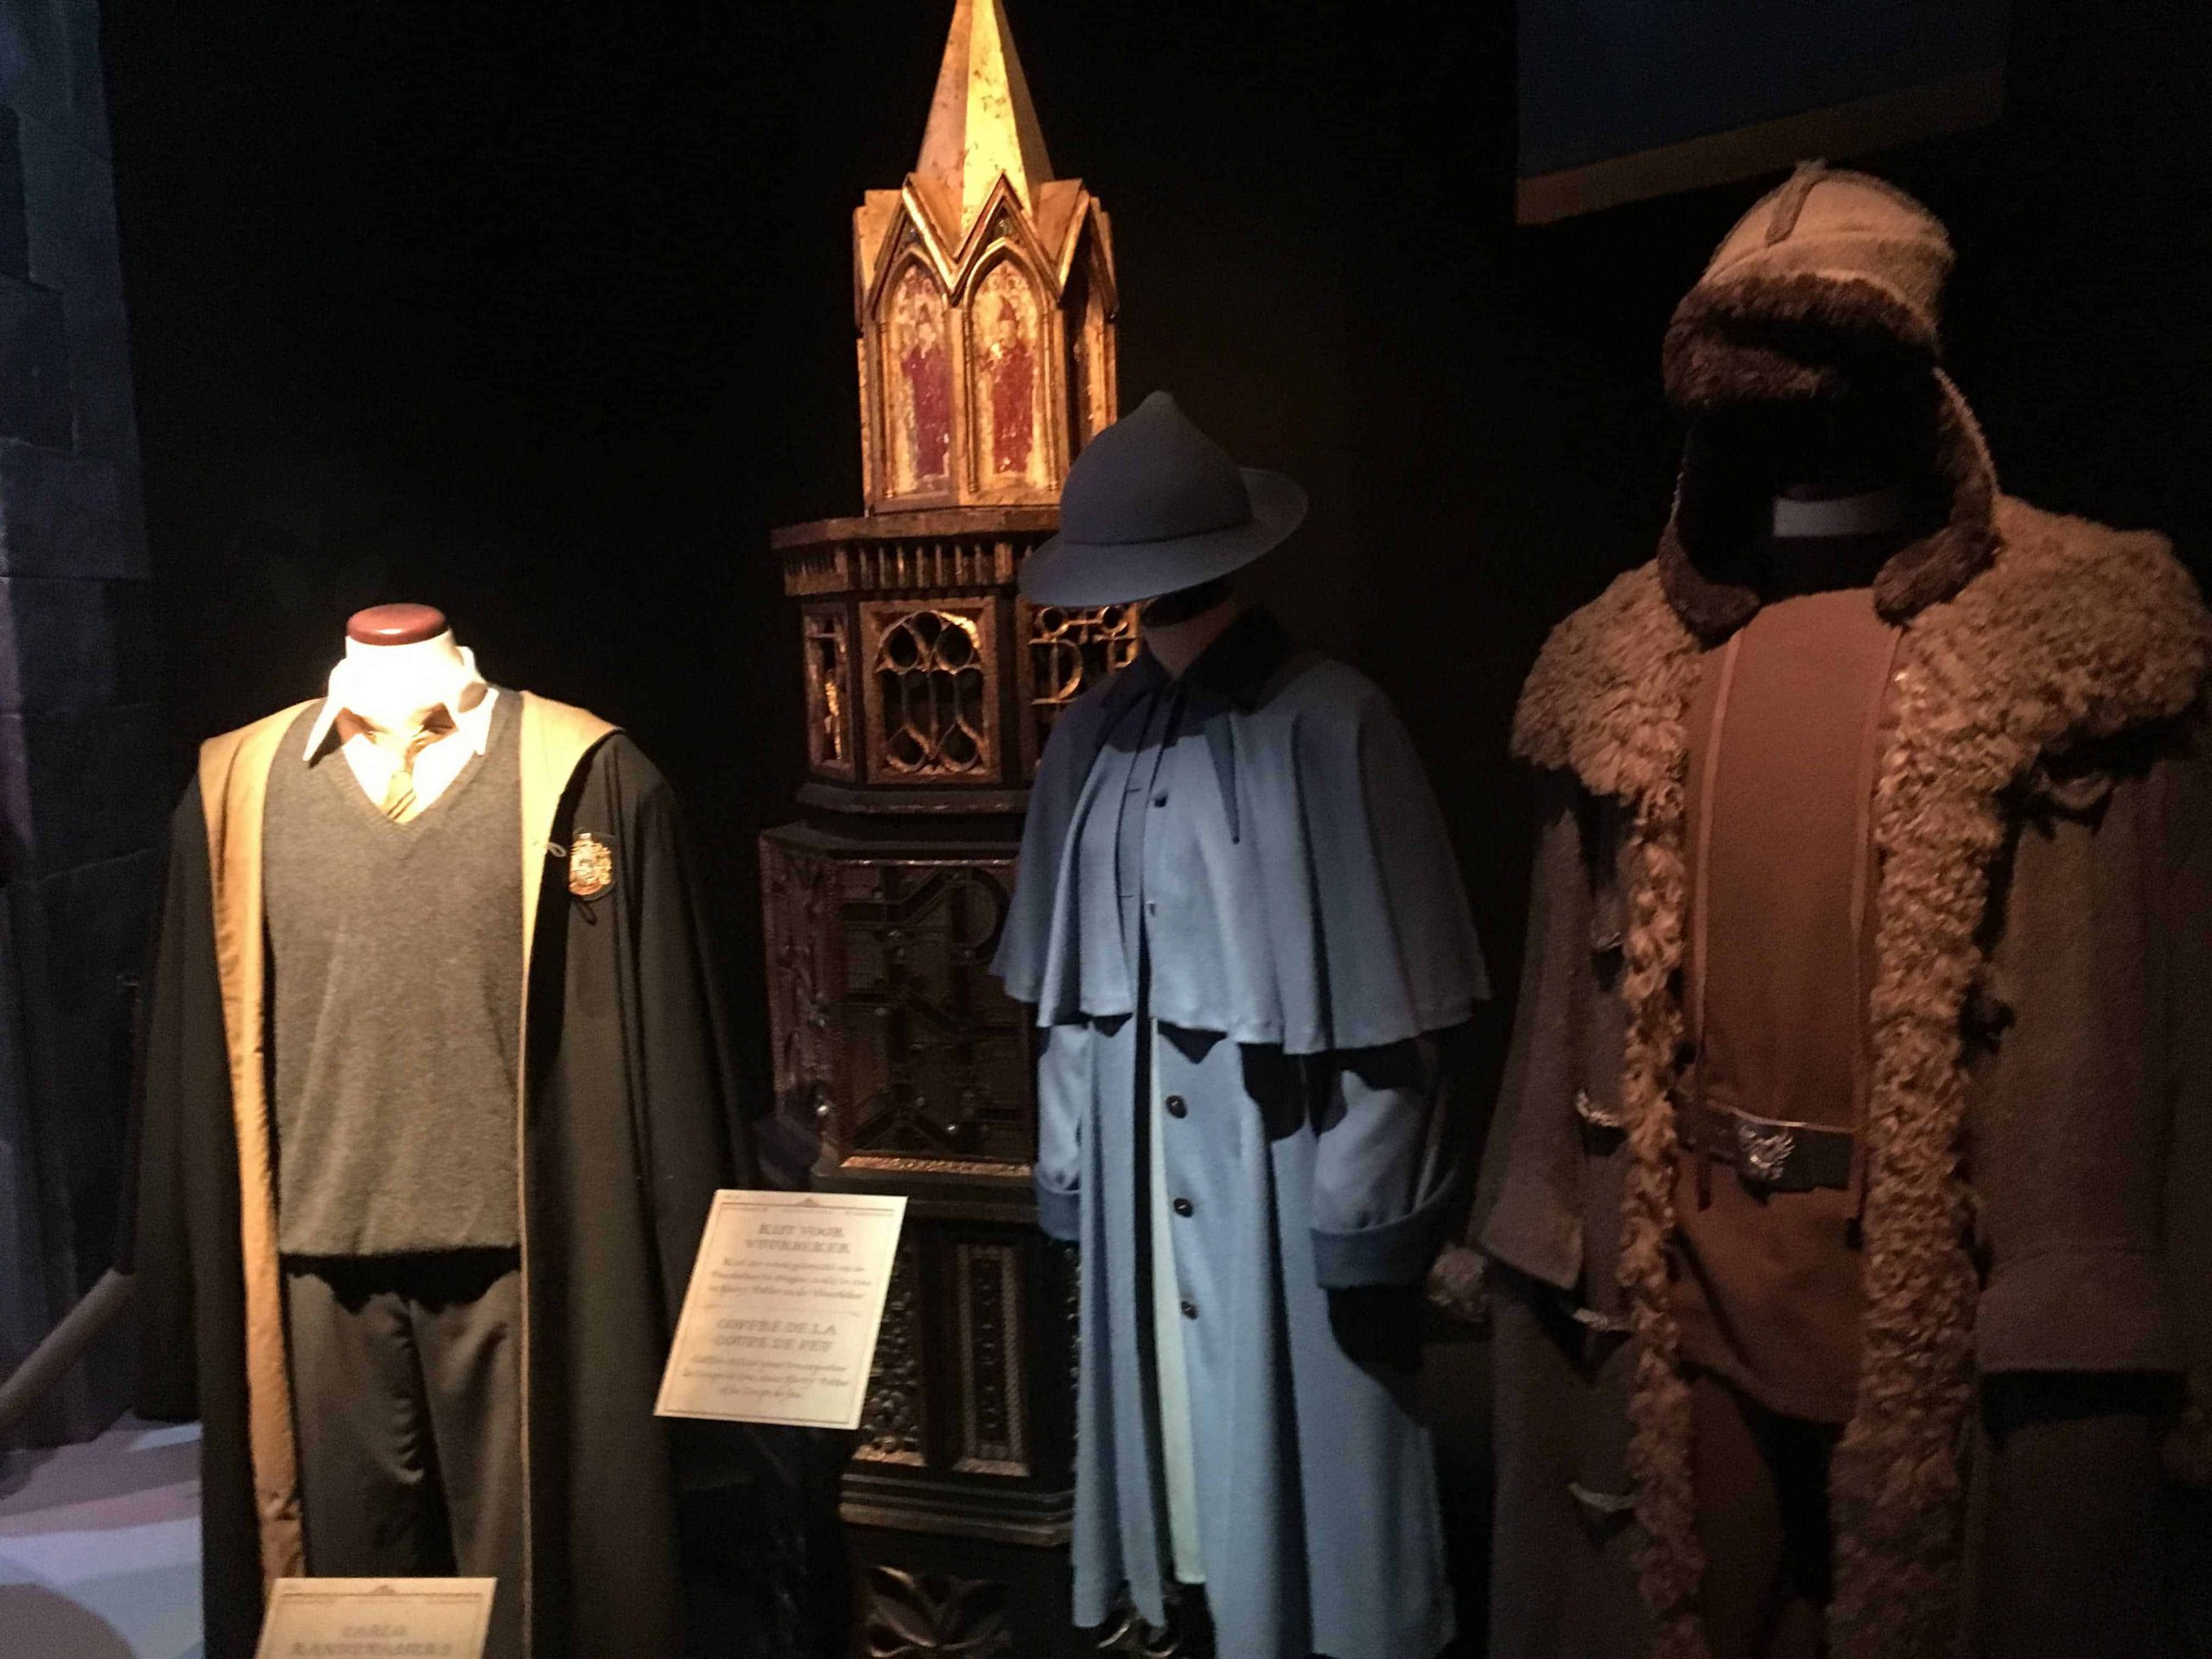 Harry Potter Costumes for sale in Brussels, Belgium, Facebook Marketplace